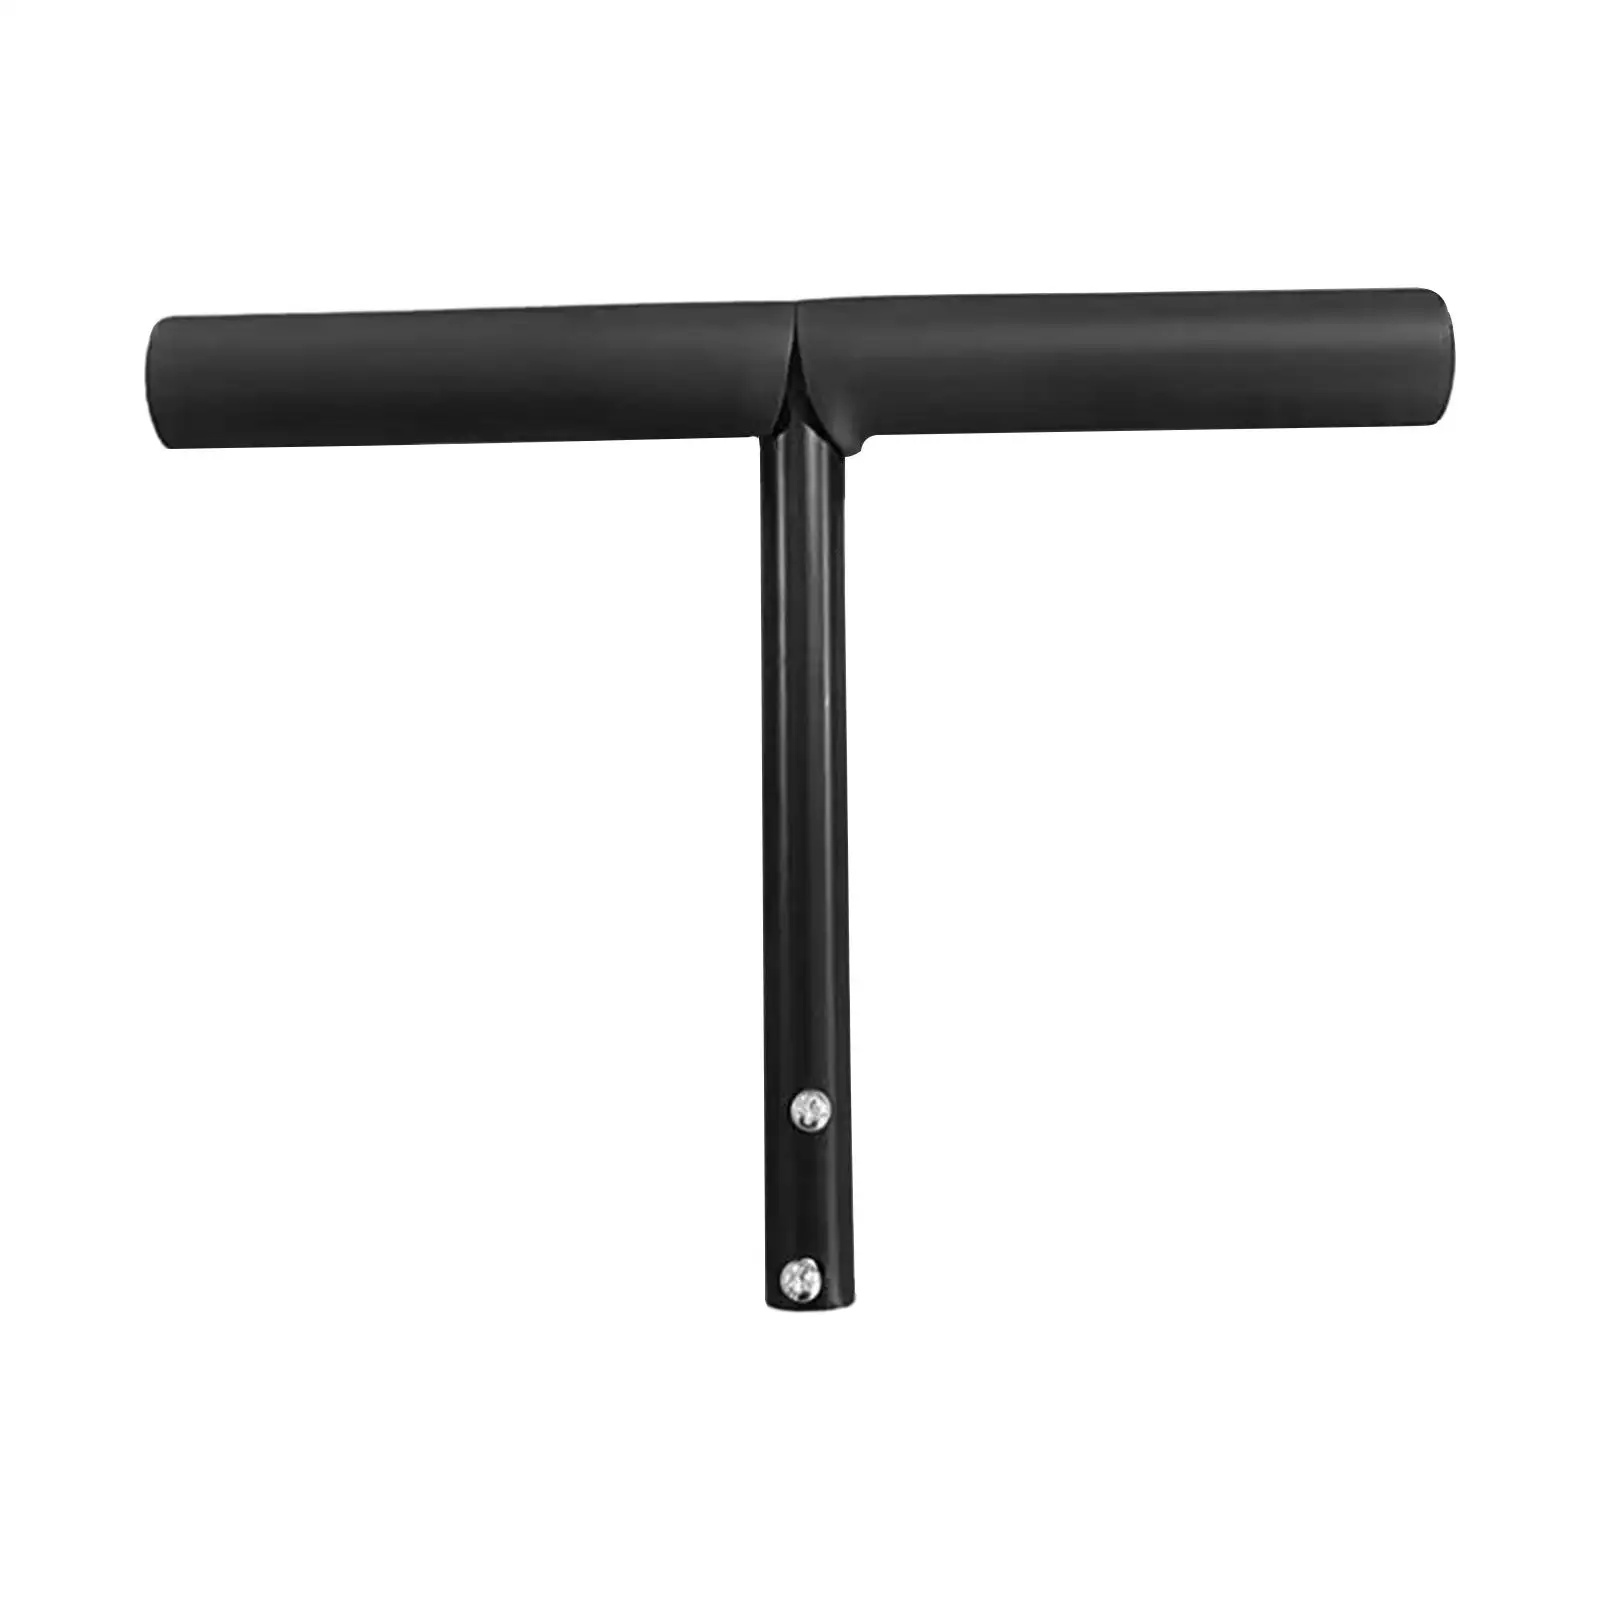 T Shaped Push Handle Bar Sturdy Easy to Install Practical Baby Bike Accessory Replacement Parts for Travel Home Outdoor